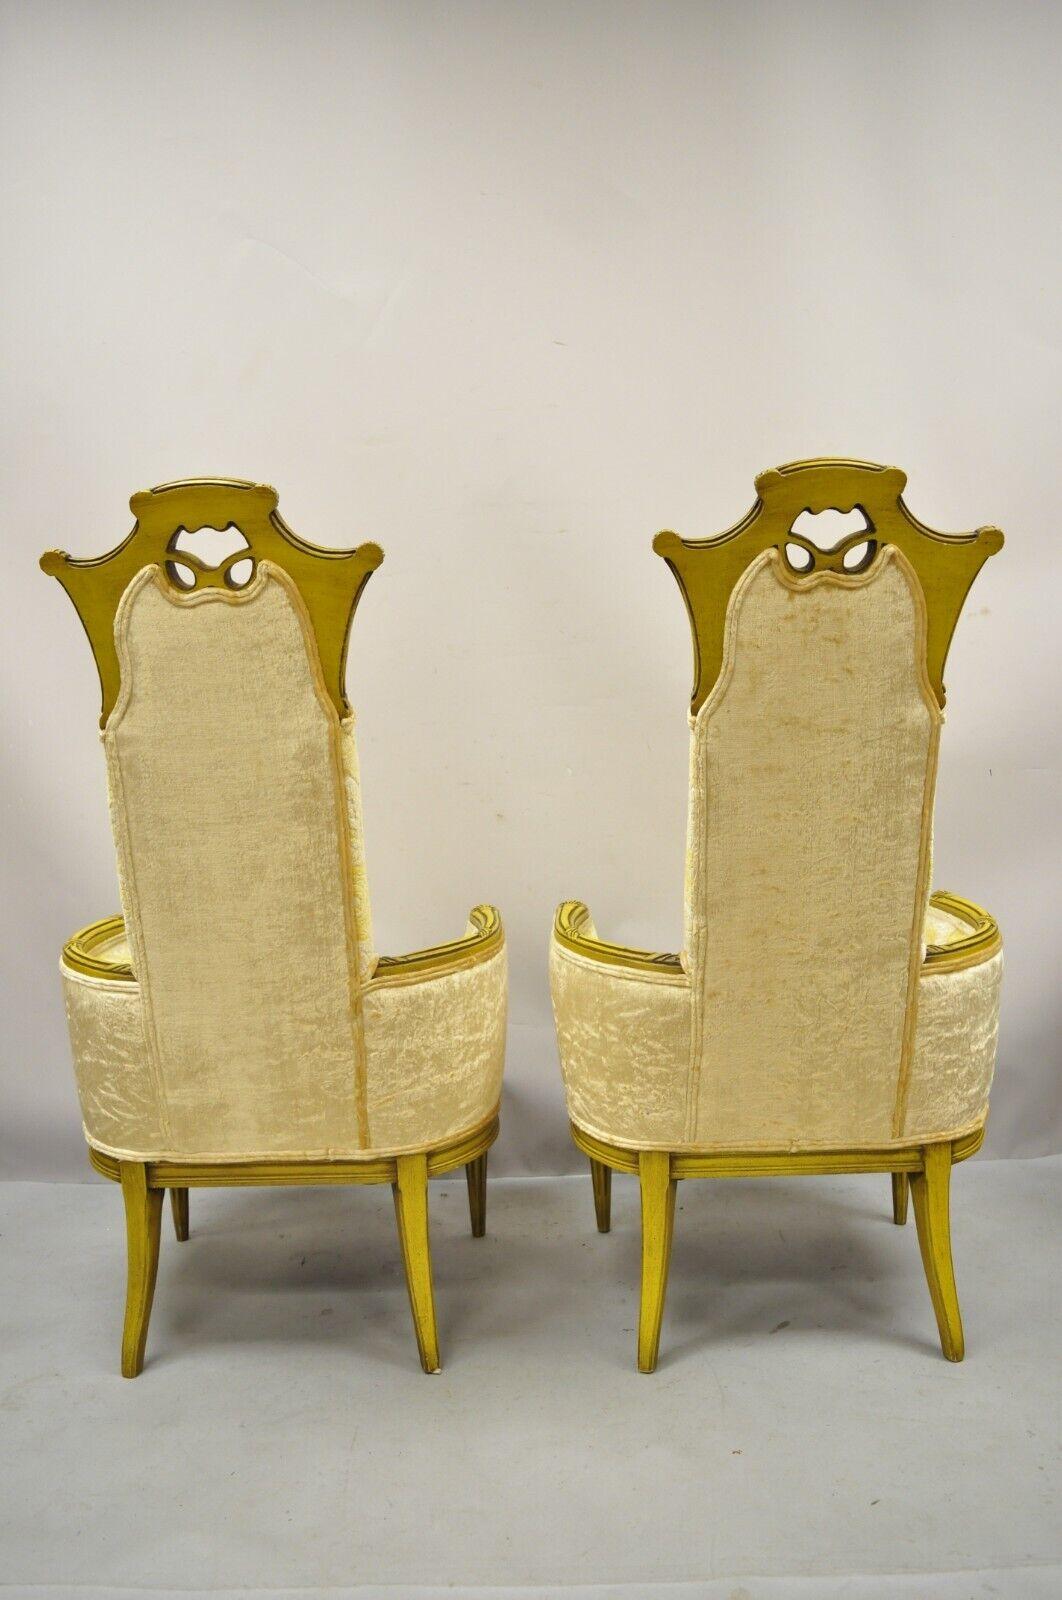 Vintage French Hollywood Regency Yellow Fireside Lounge Chairs - a Pair For Sale 5